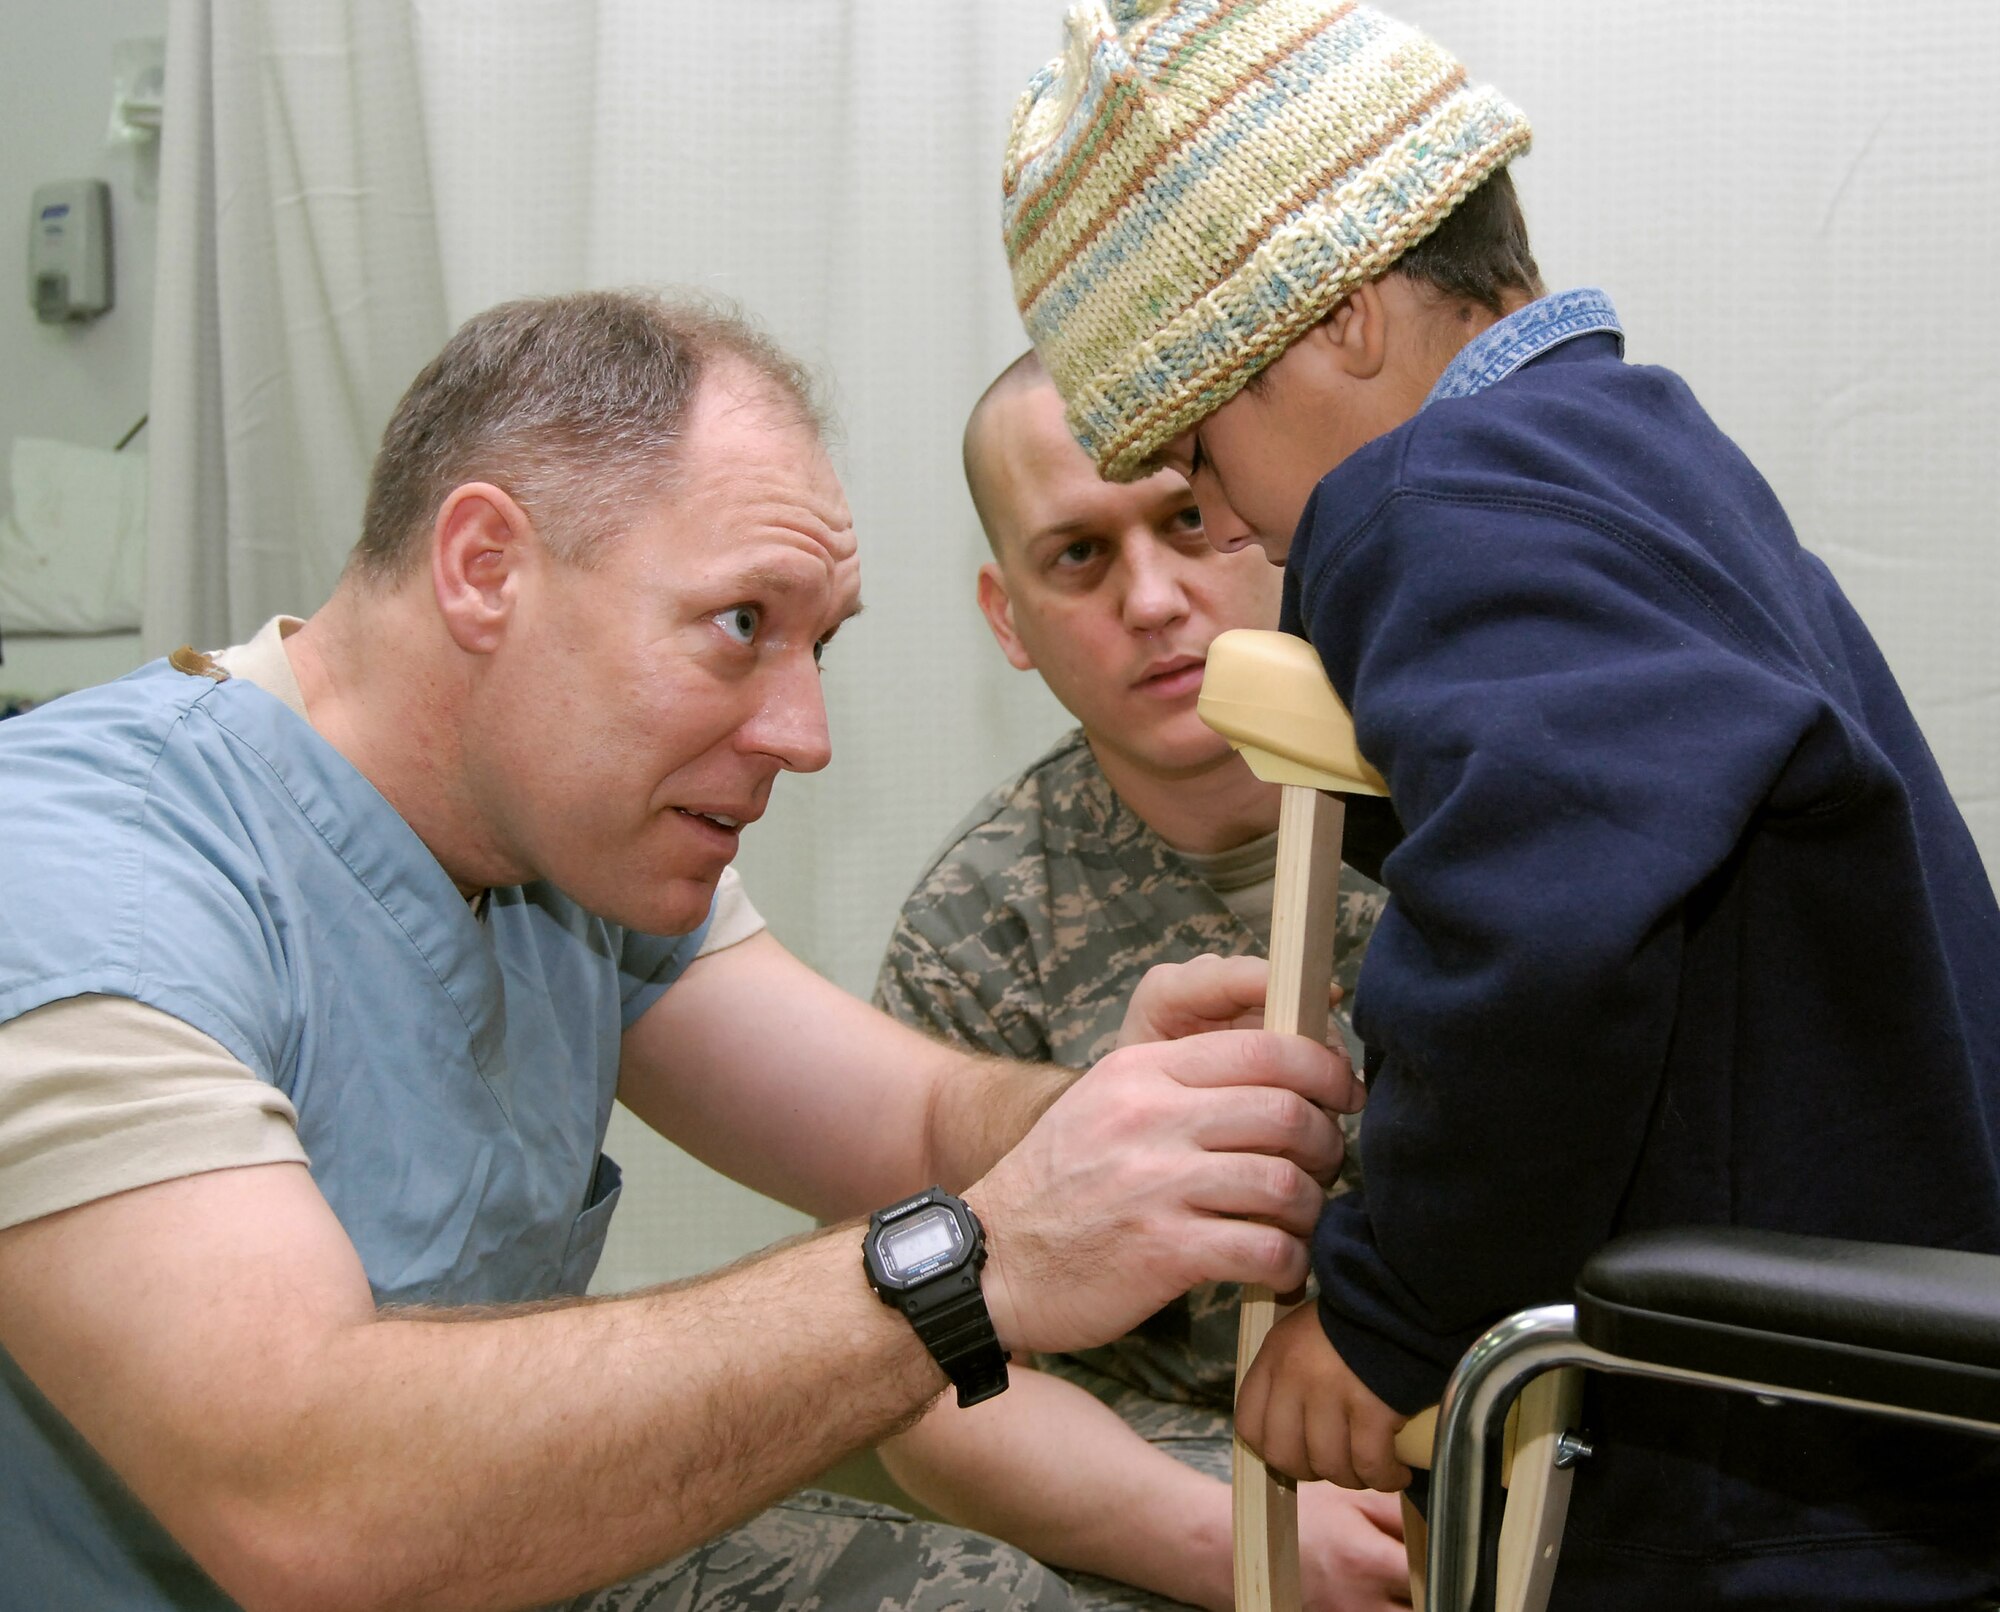 Lt. Col. Robert Burgess and Tech. Sgt. Richard Kemp help fit a pair of crutches for Mustafa Jasim in the Air Force Theater Hospital's intermediate care ward at Joint Base Balad, Iraq, Dec. 20. Colonel Burgess, a 332nd Expeditionary Medical Operations Squadron physical therapist, is deployed from Shaw Air Force Base, S.C.  Sergeant Kemp, a 332nd EMDOS medical technician, is deployed from Wilford Hall Medical Center at Lackland AFB, Texas. (U.S. Air Force photo/Staff Sgt. Don Branum) 